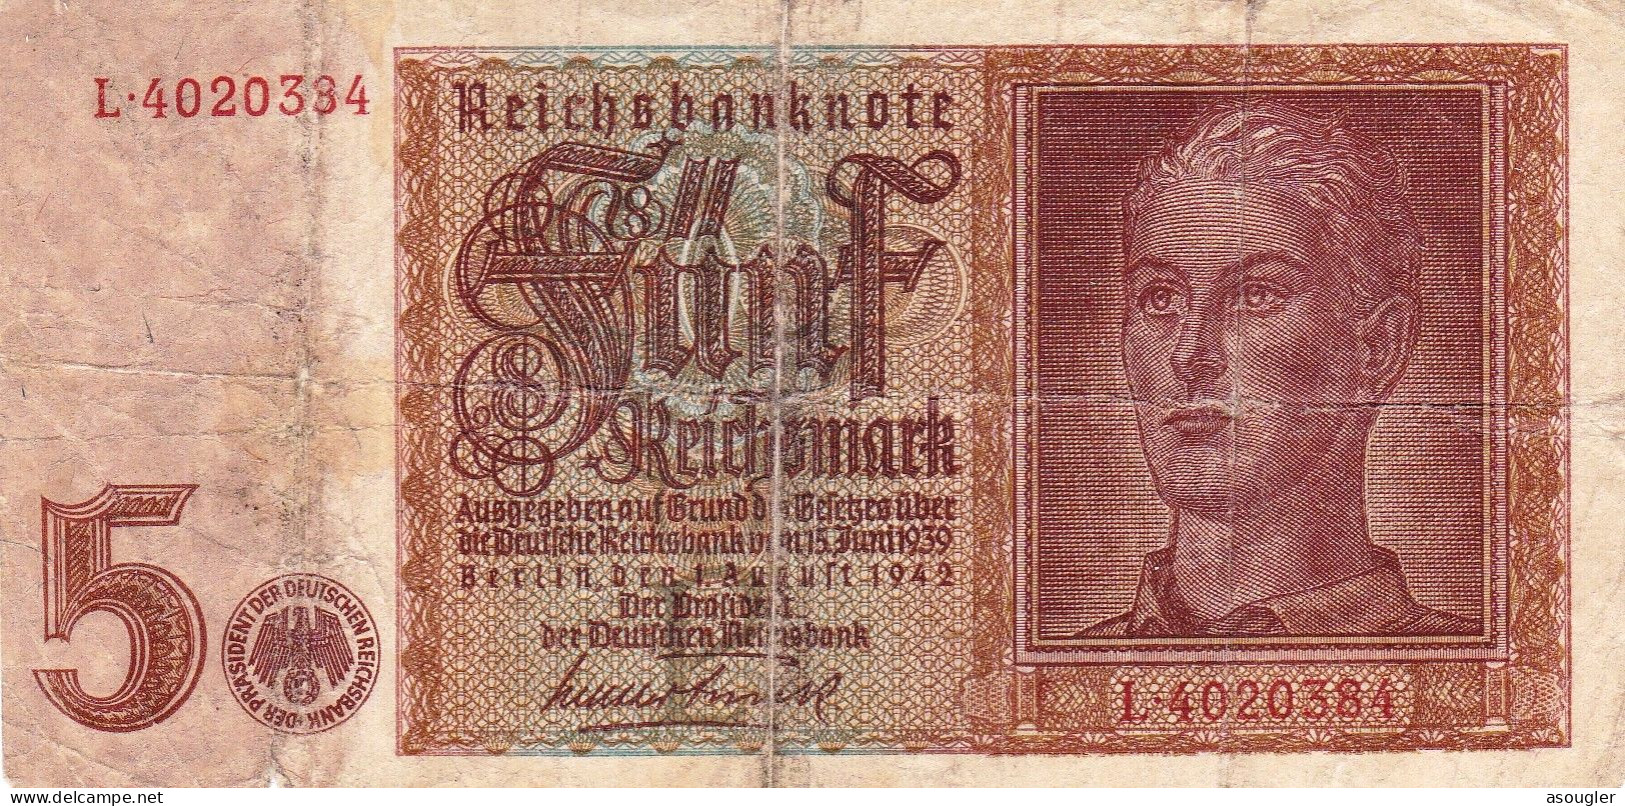 GERMANY 5 Reichs Mark (1939) 1942 F P-186a "free Shipping Via Regular Air Mail (buyer Risk)" - 5 Reichsmark